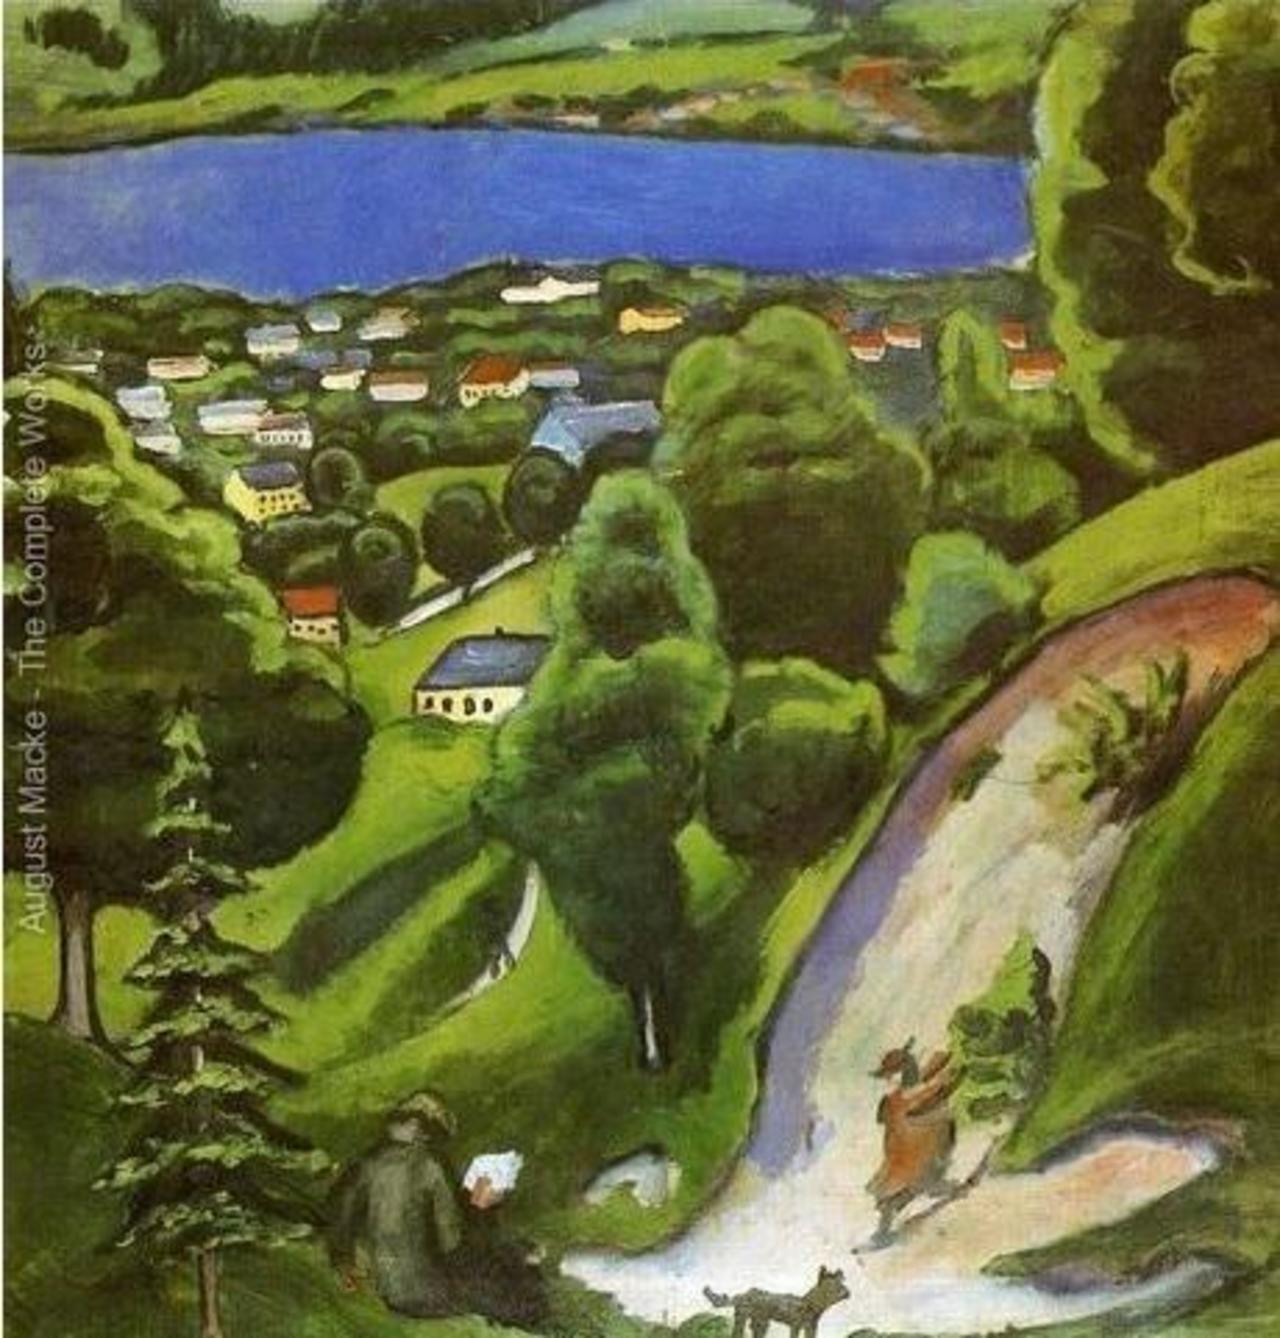 RT @originalartand1: Thanks for the awesome RTs #FF Happy Friday @afagasta @ahmet11kartal Tegernsee Landscape #AugustMacke http://t.co/Ei2pW0OdYG